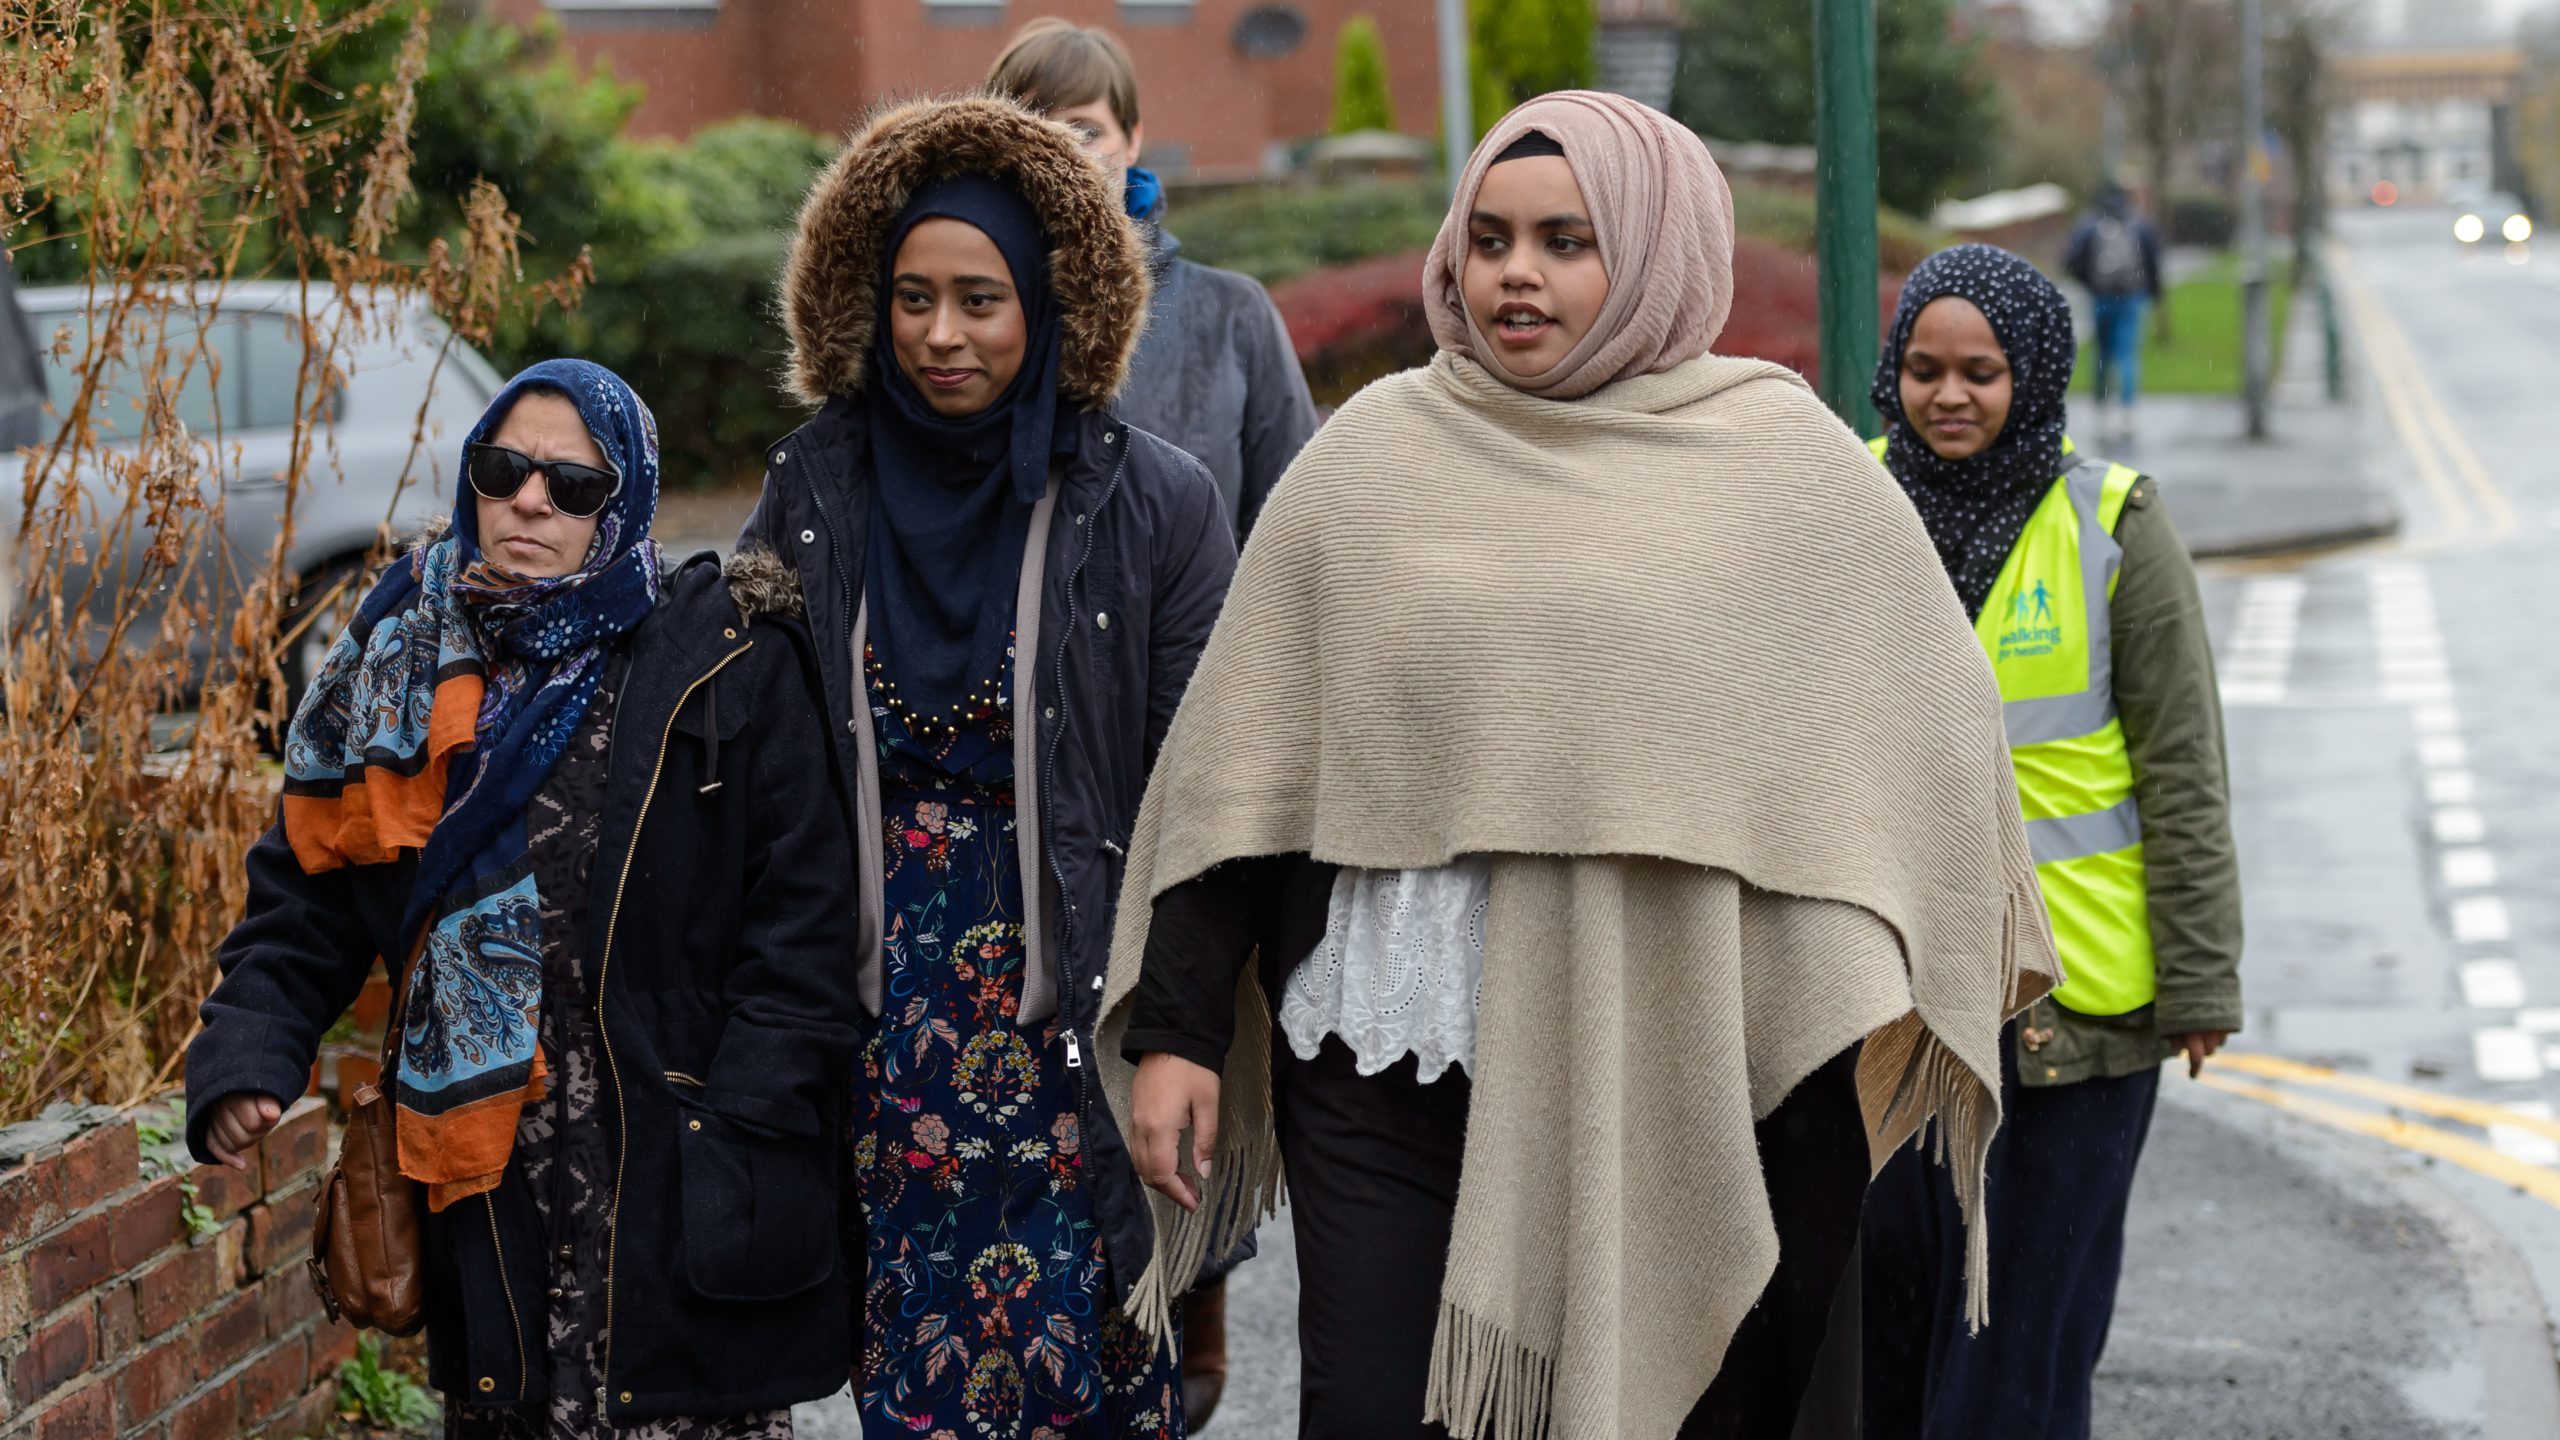 A group of Muslim women walking as part of a group activity